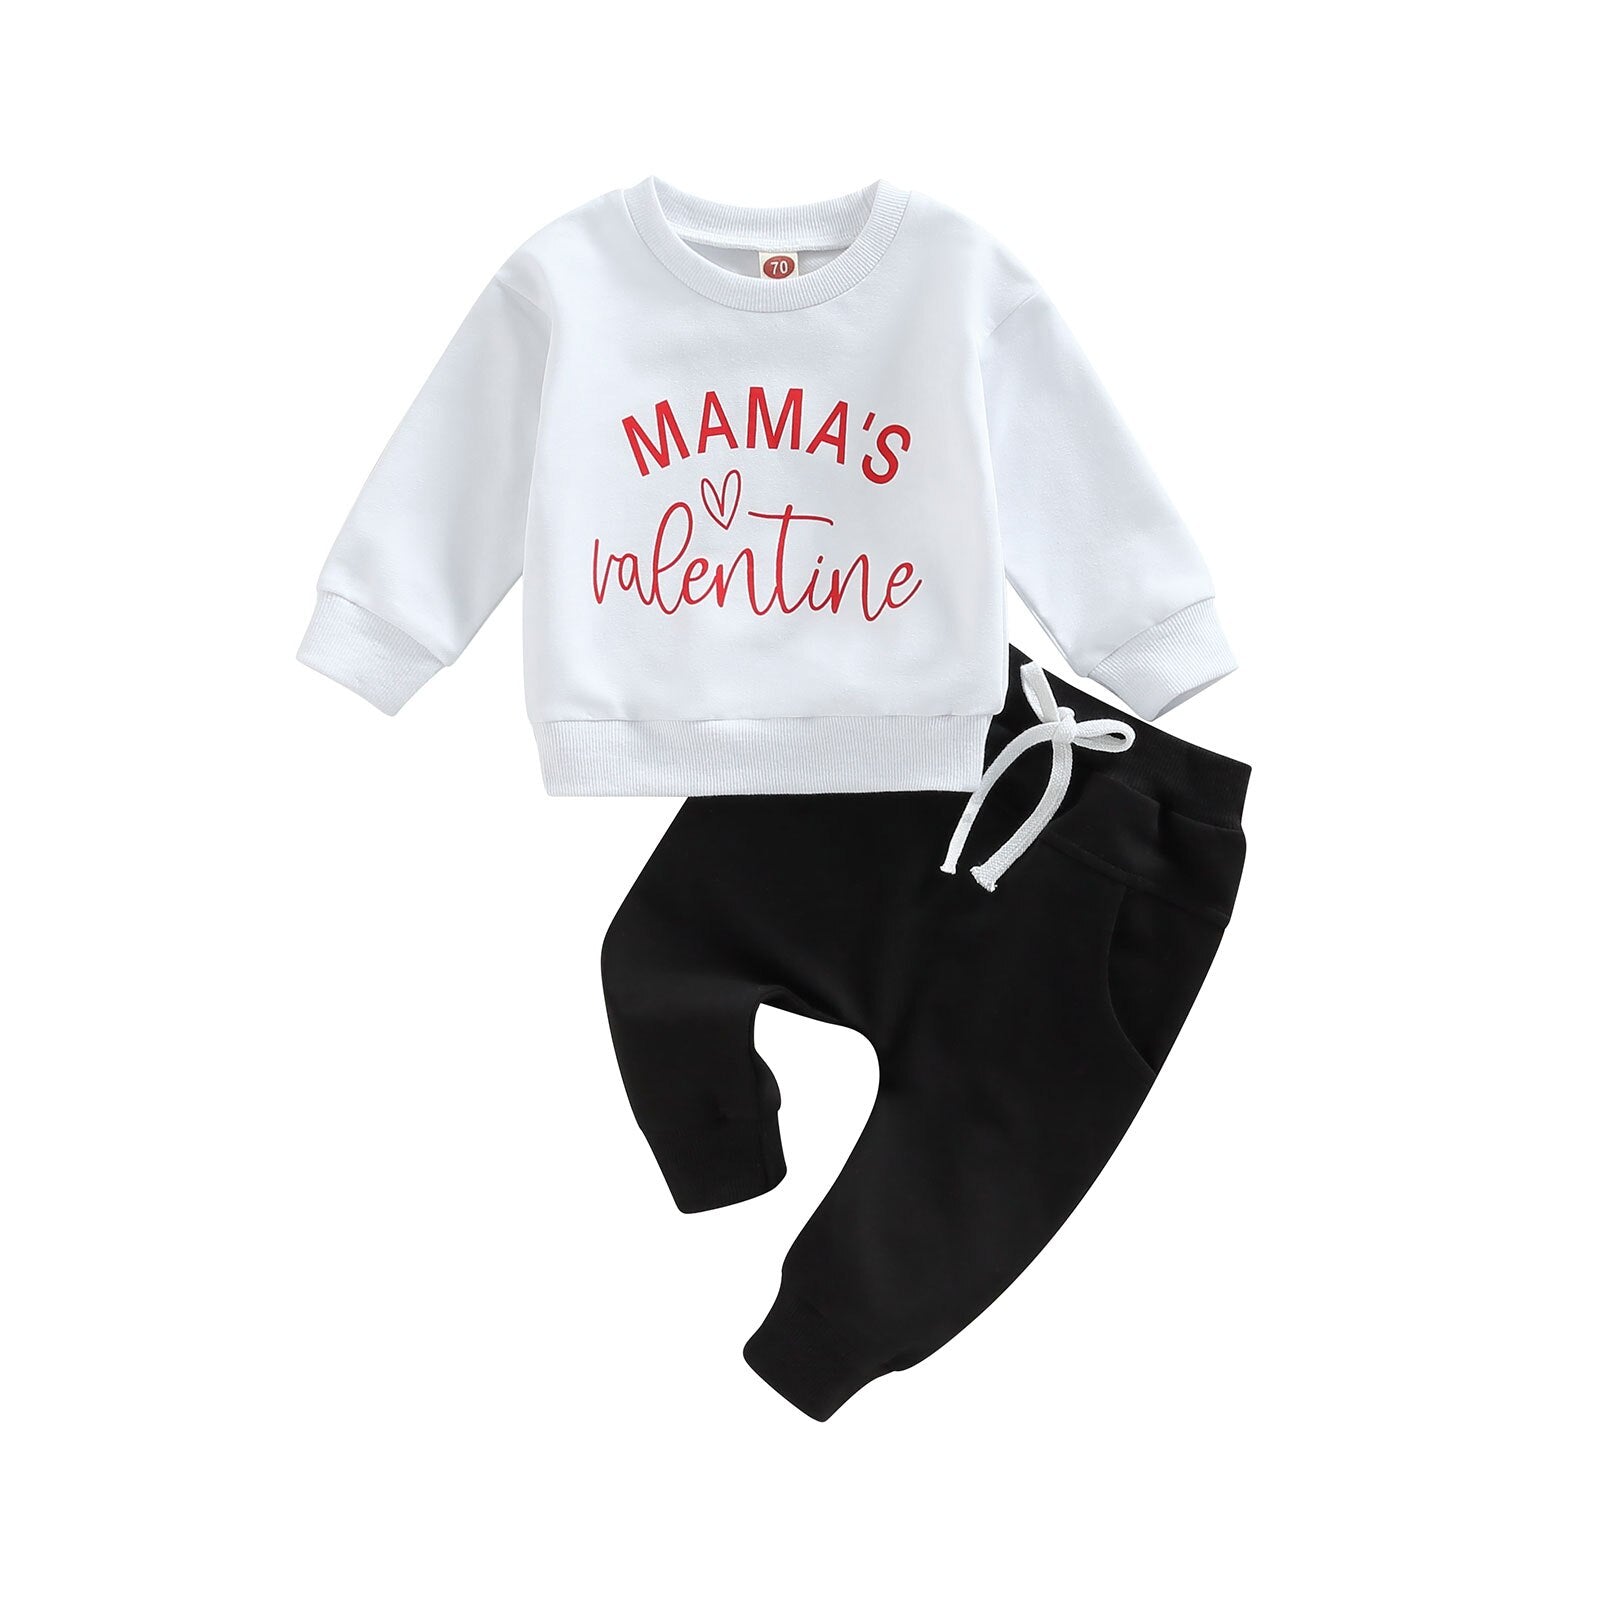 Dress Your Little Boy in Style with This Trendy Letter Cow Head Print Sweatshirt and Trousers Set for Spring